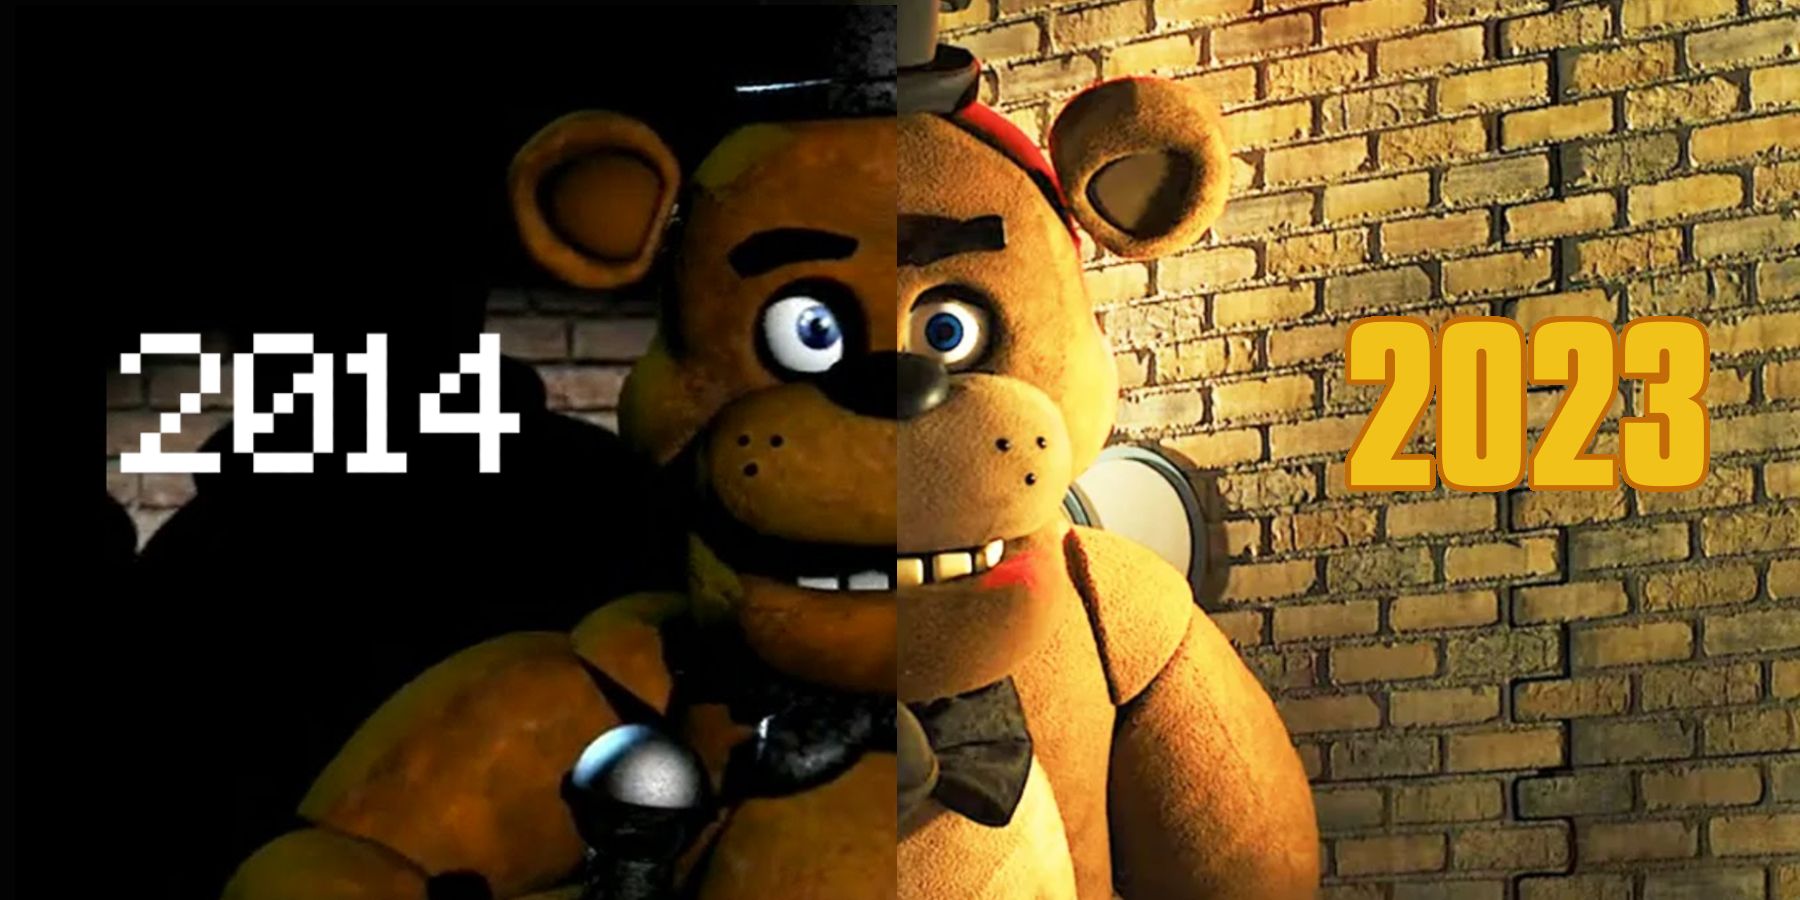 If FNAF 4 is a dream, does that mean that the nights for the kids